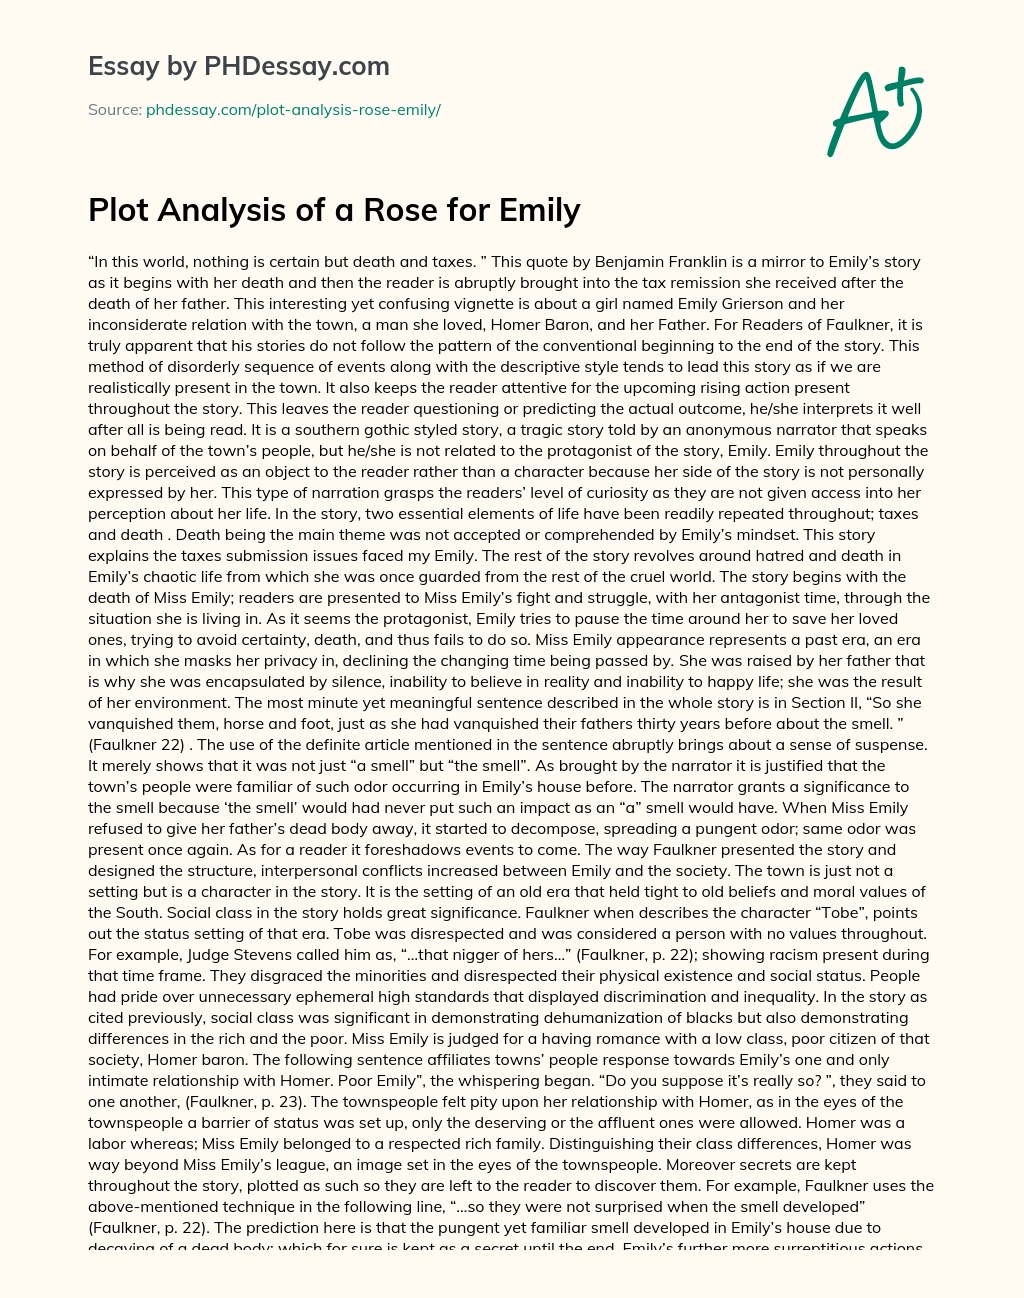 Plot Analysis of a Rose for Emily essay